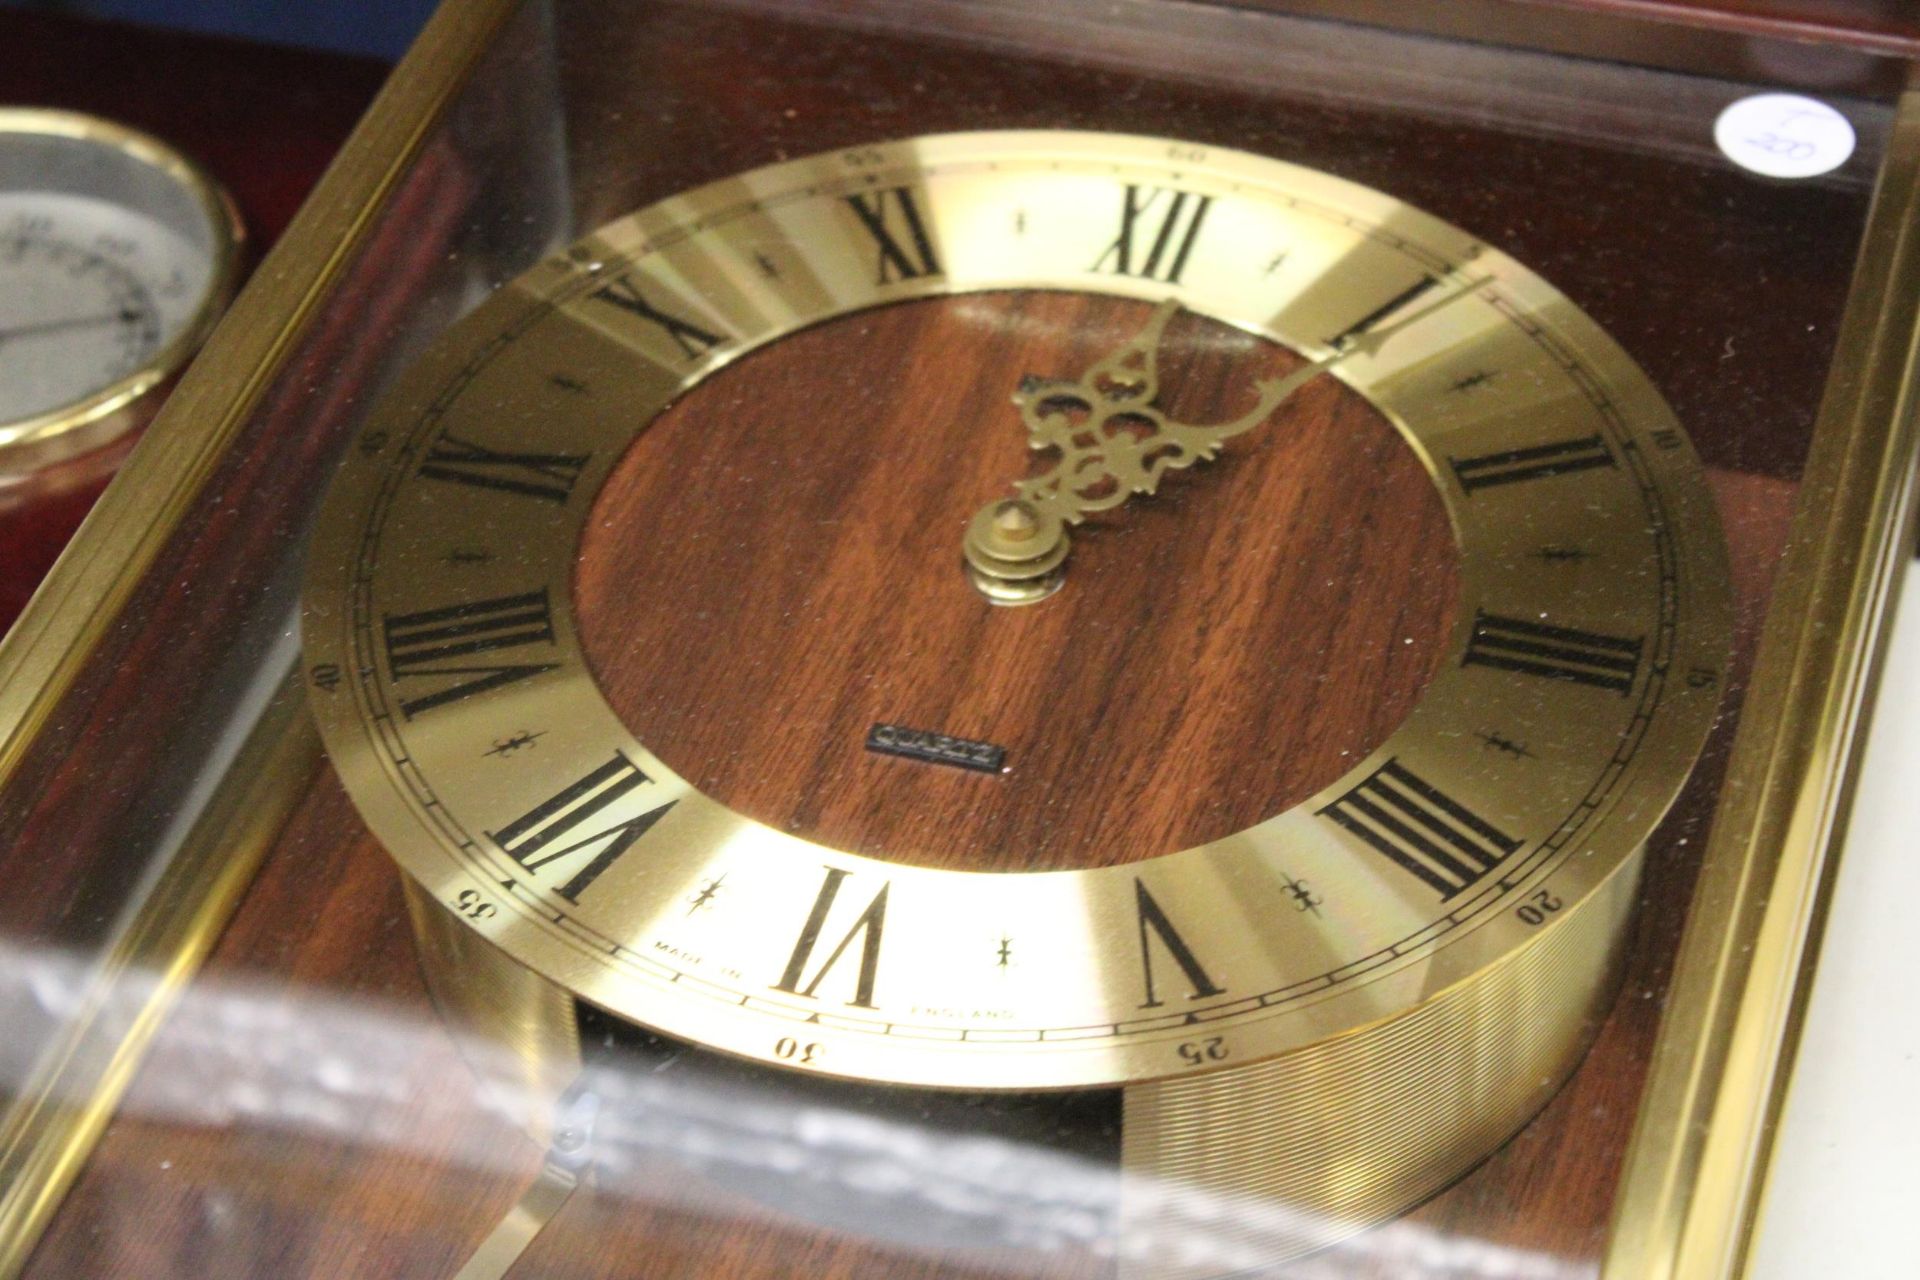 A METAMAC QUARTZ WALL CLOCK, A CARRIAGE CLOCK AND A BAROMETER, CLOCK AND THERMOMETER IN A WOODEN - Image 6 of 6